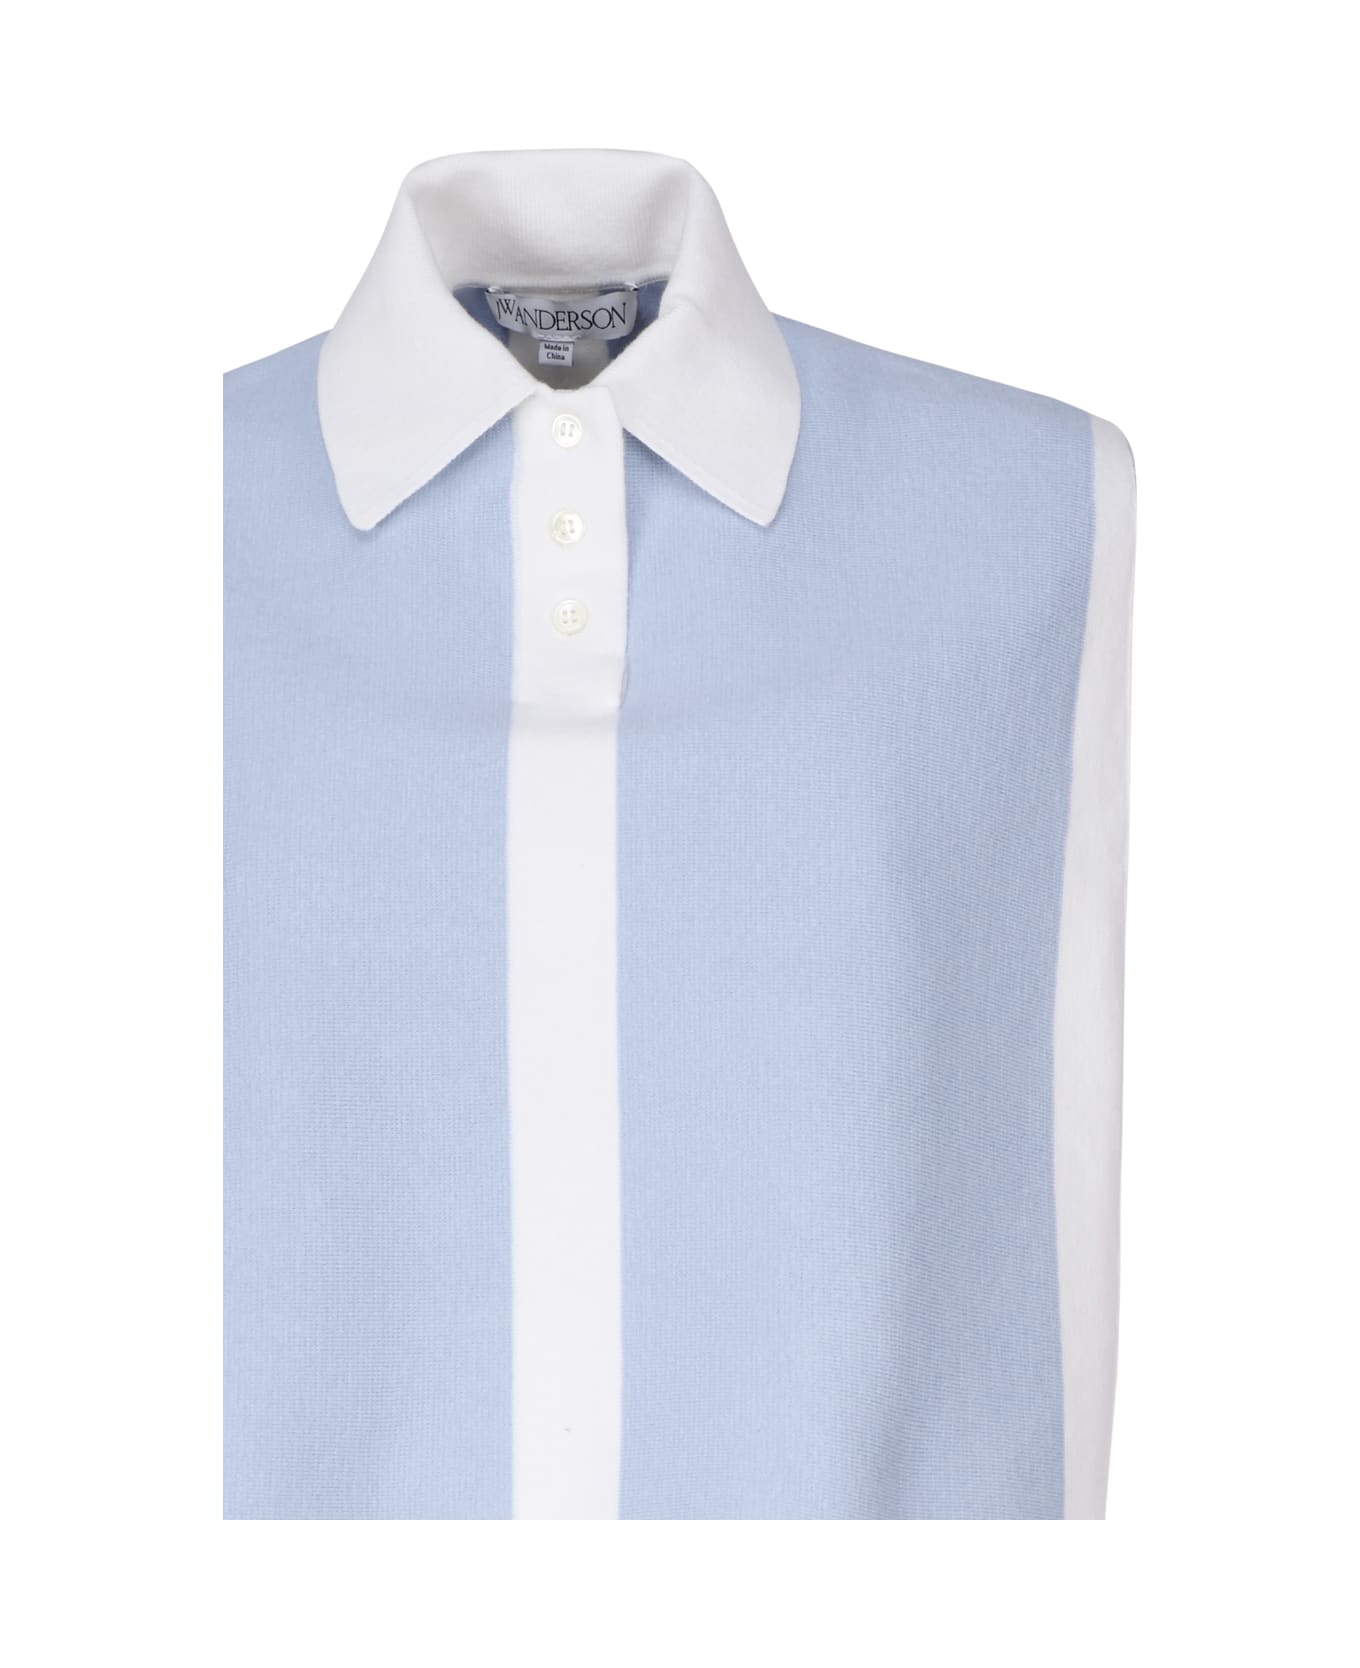 J.W. Anderson Tank Top With Collar - Light blue, white